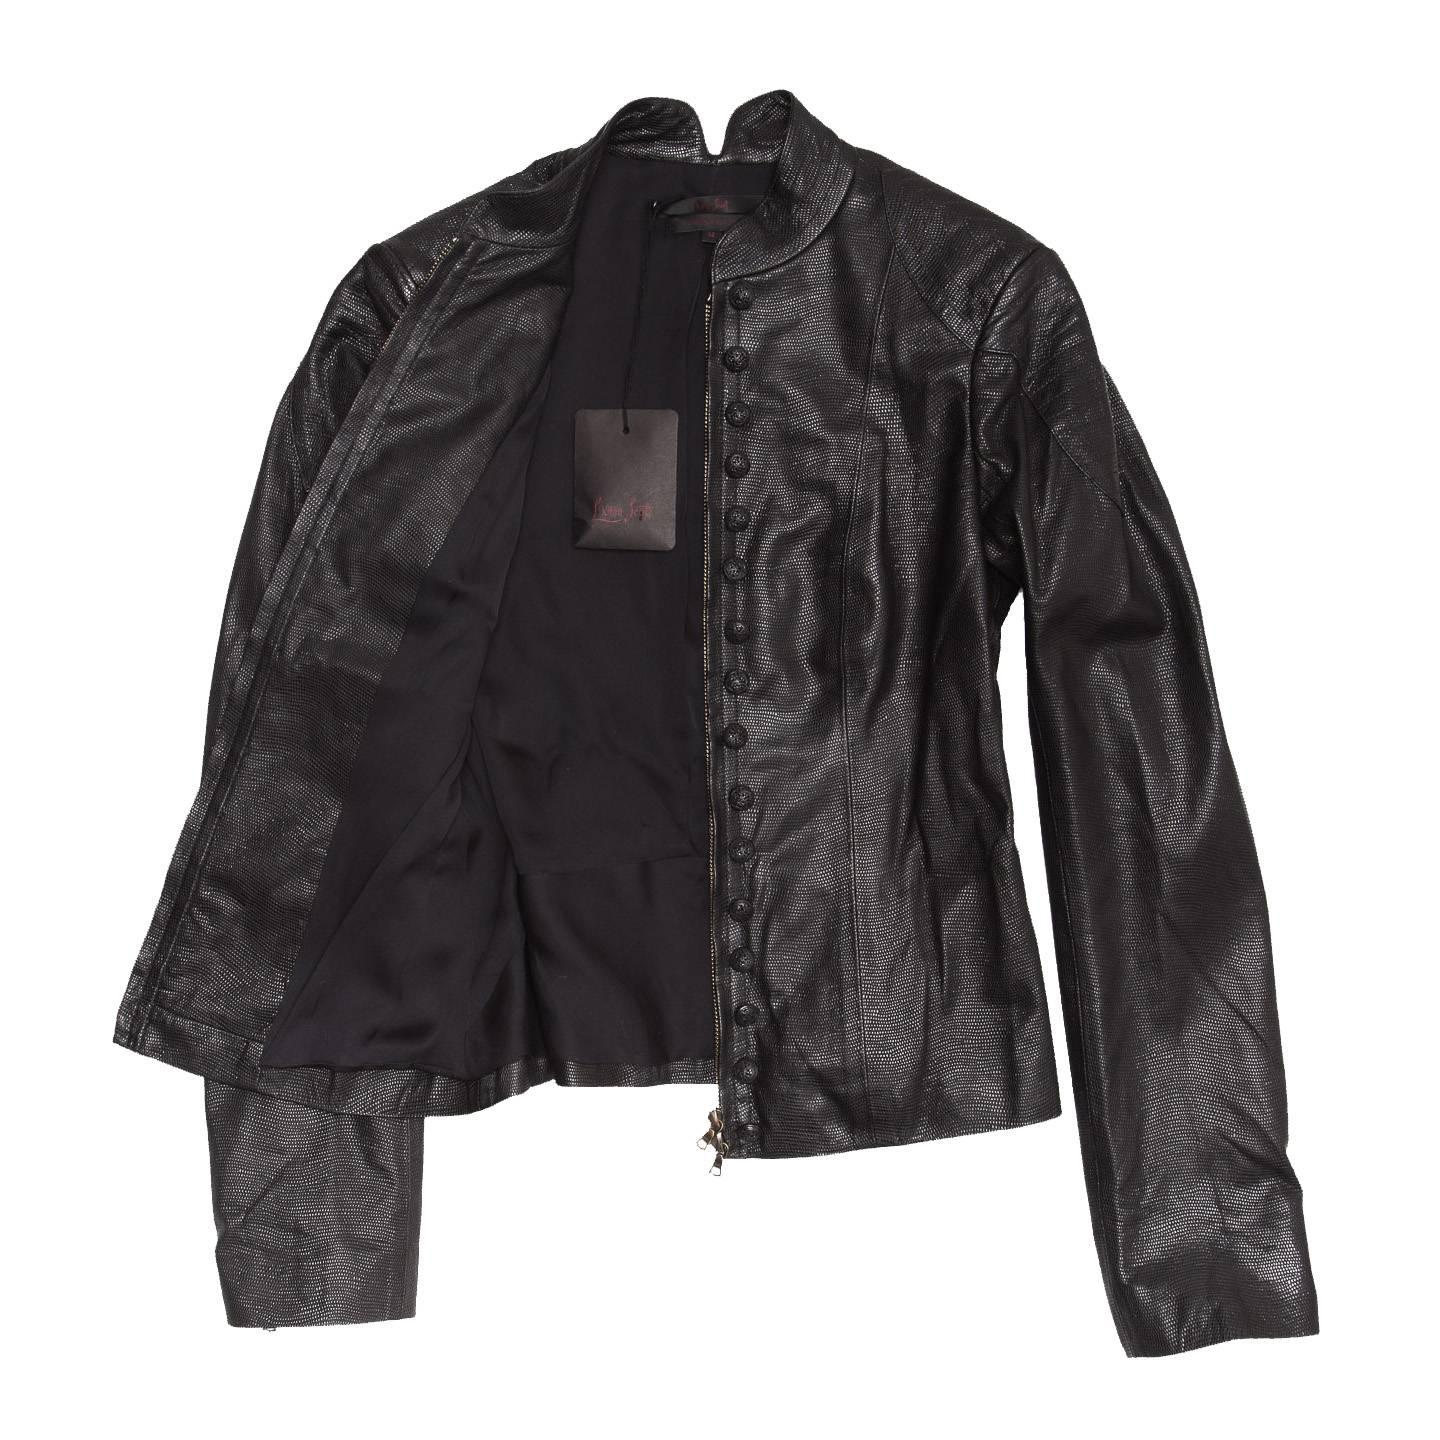 Lwren Scott Black Leather Zip Jacket In New Condition For Sale In Brooklyn, NY